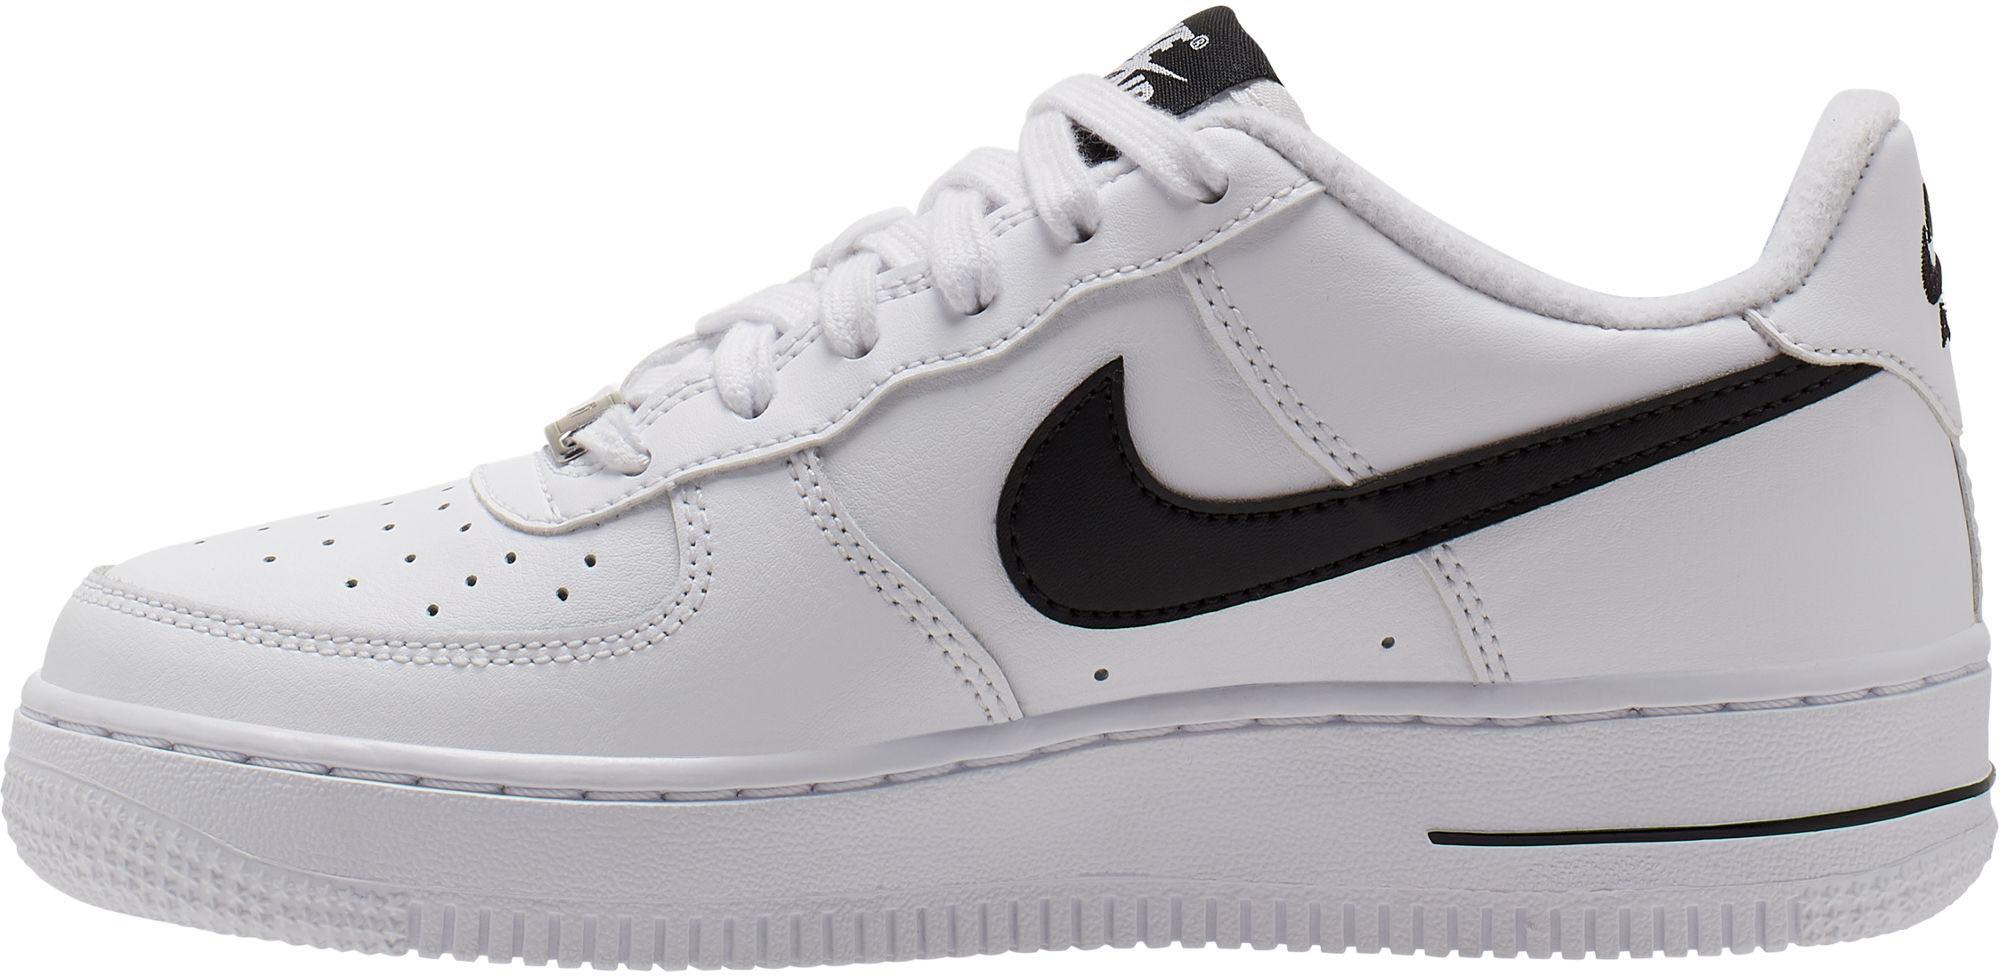 shops that sell air force 1